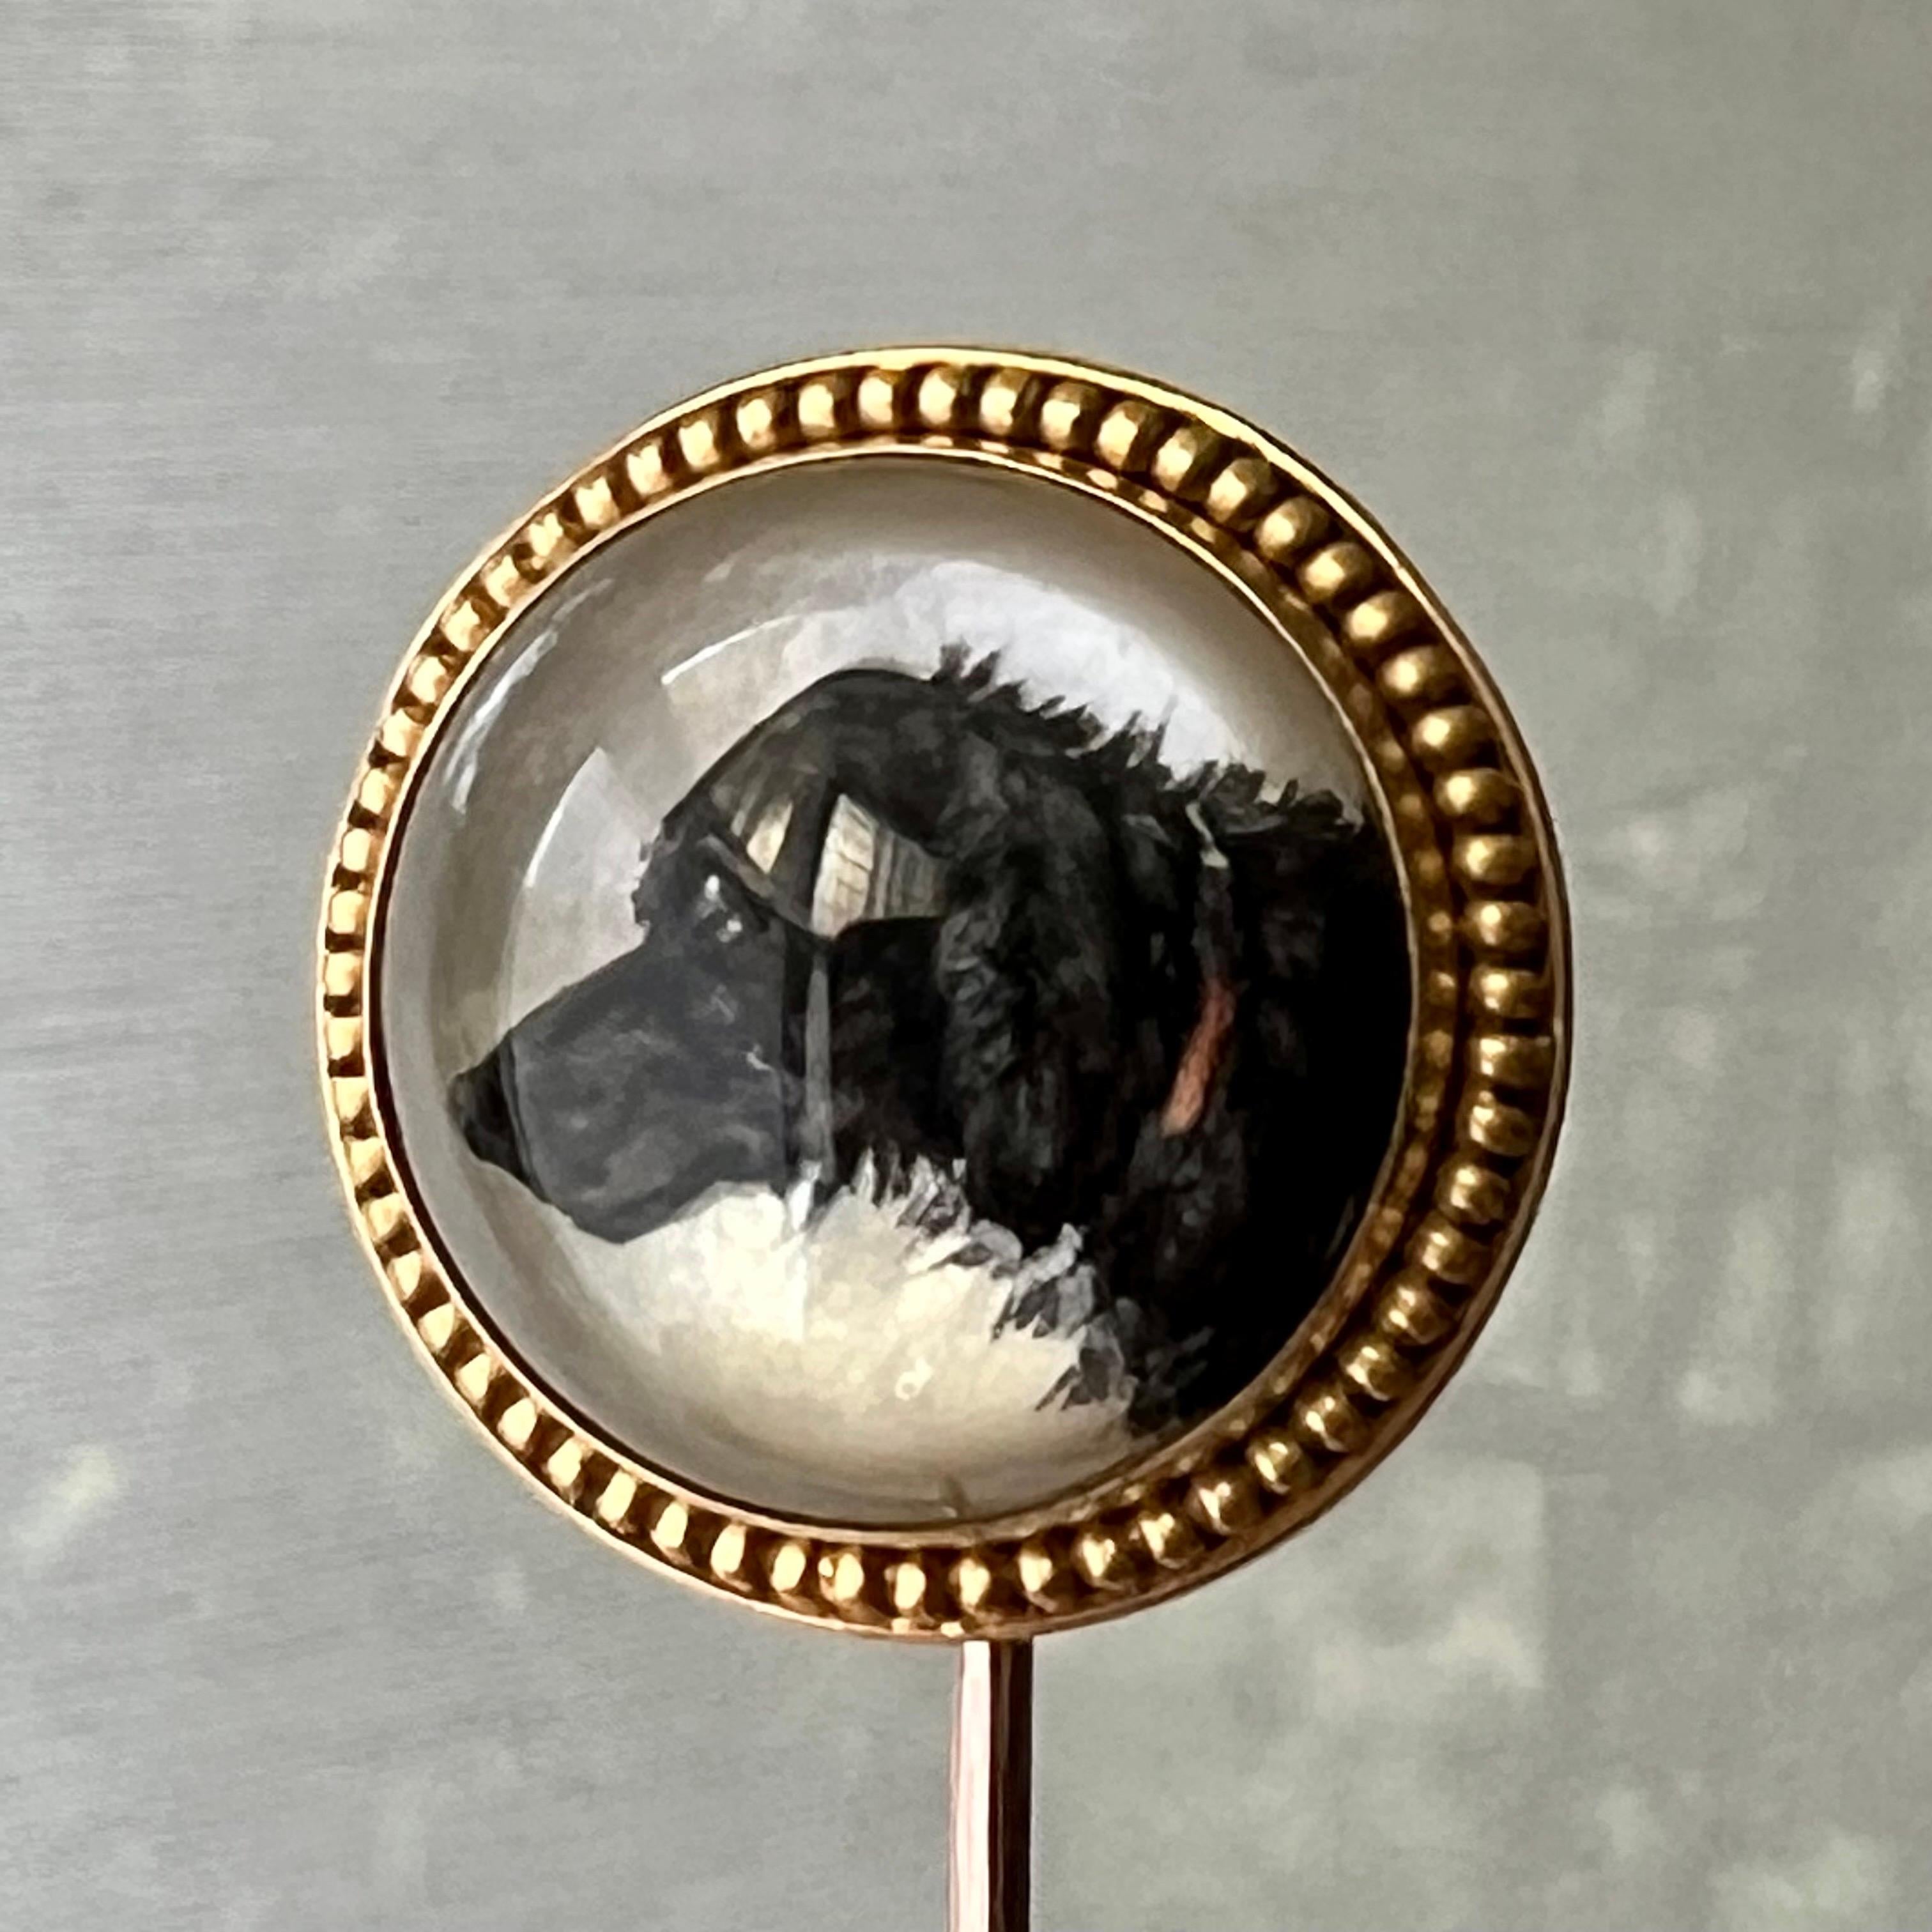 An antique reverse intaglio crystal stickpin or lapel pin depicting a hunting dog. The dog painting was done on a reverse carved crystal and has a mother of pearl background. The crystal dog painting is set in a granulated 14 karat yellow gold